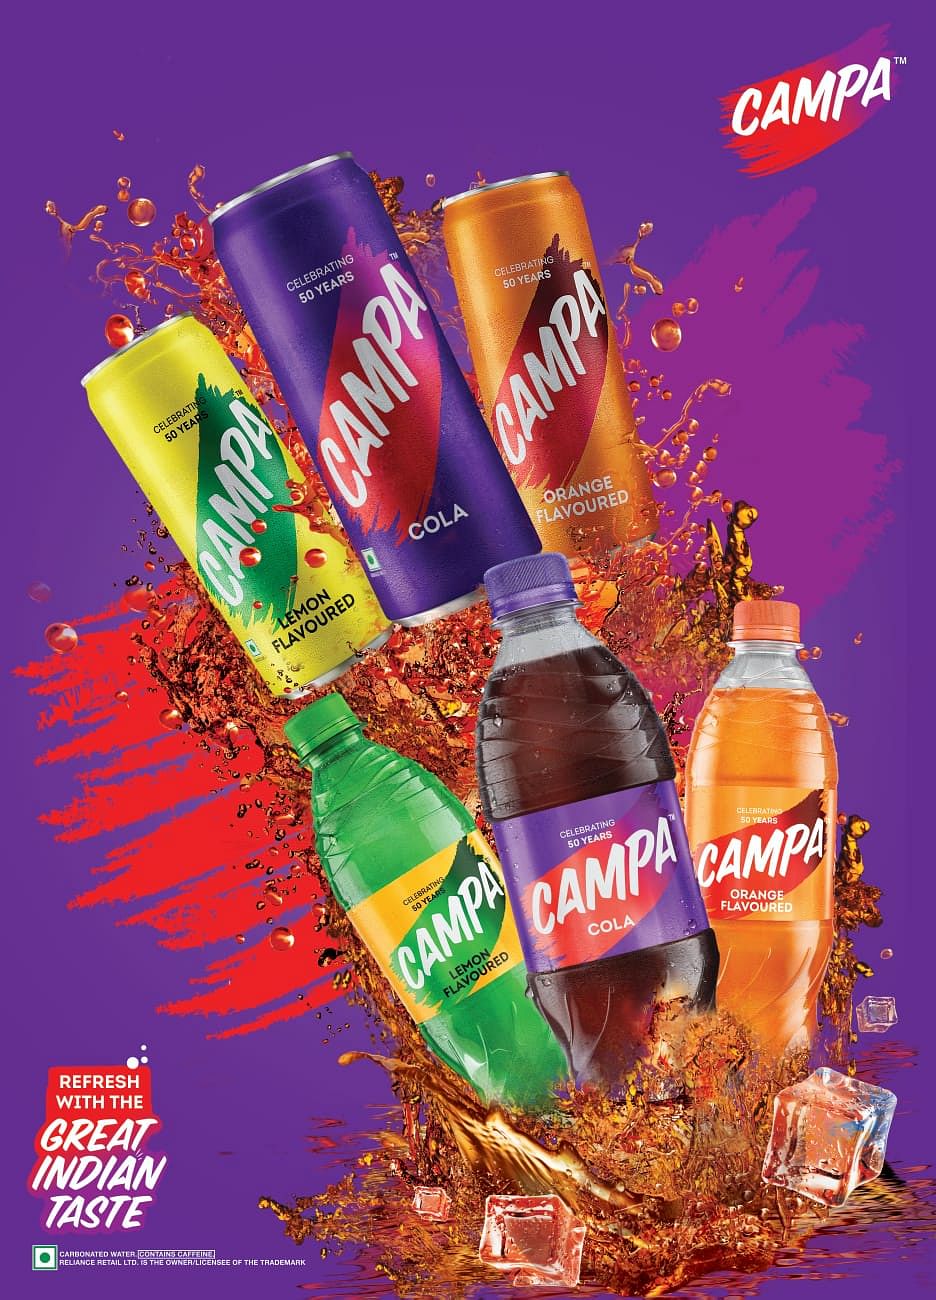 Reliance re-launches Campa Cola